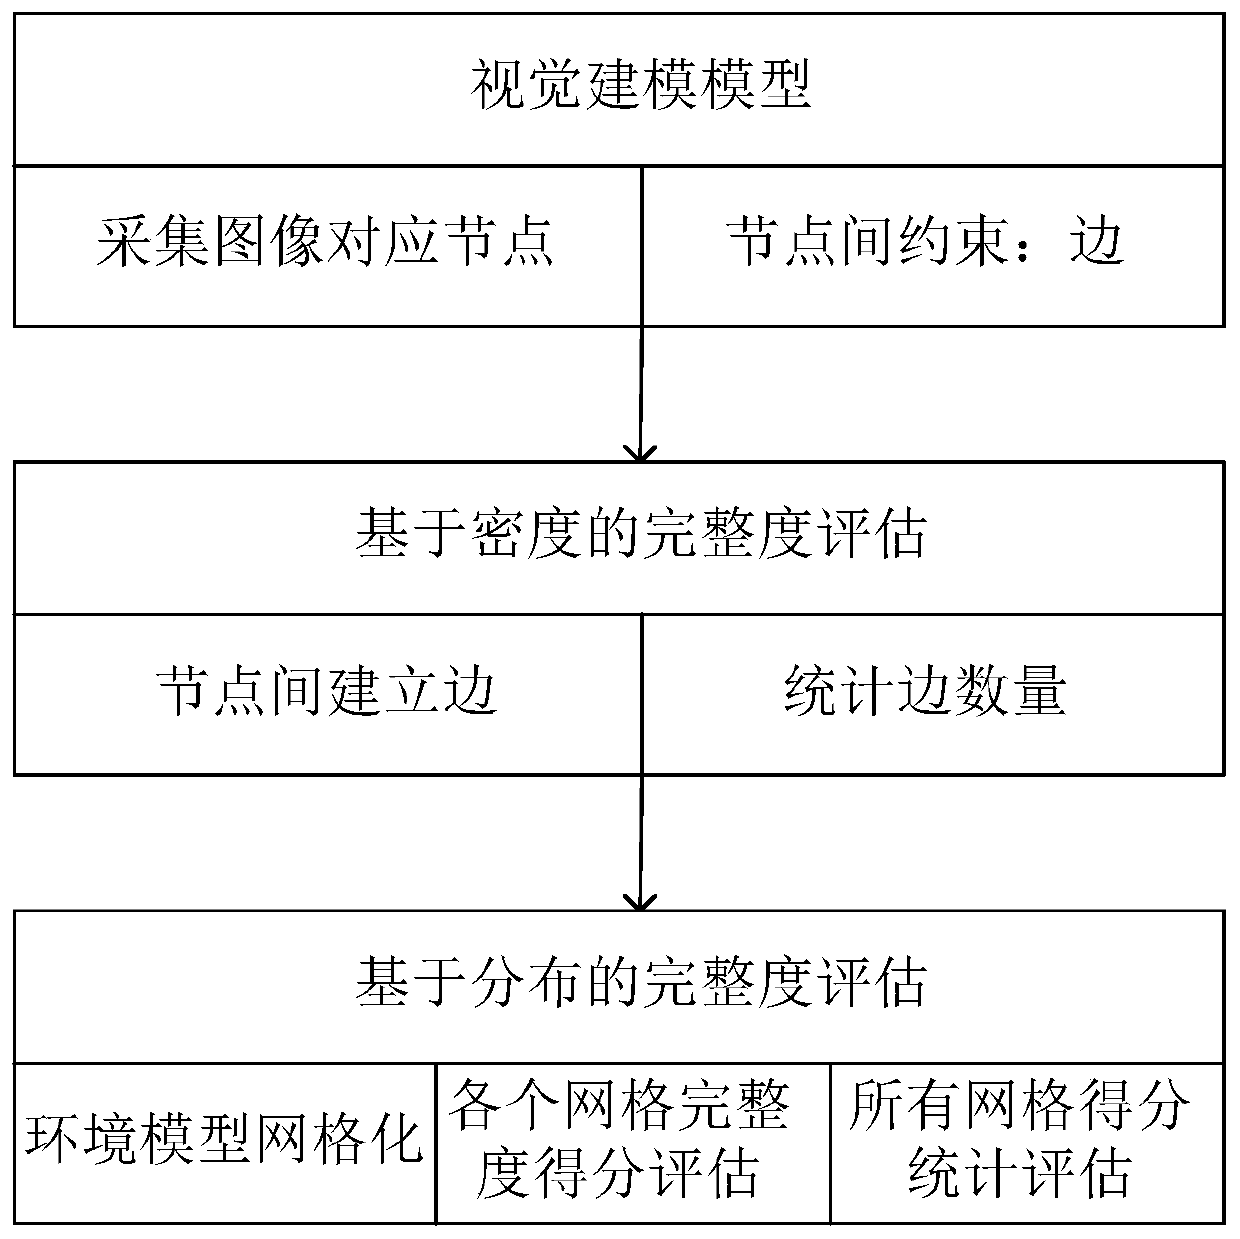 Method for improving reliability of monocular vision localization through environmental model integrity assessment